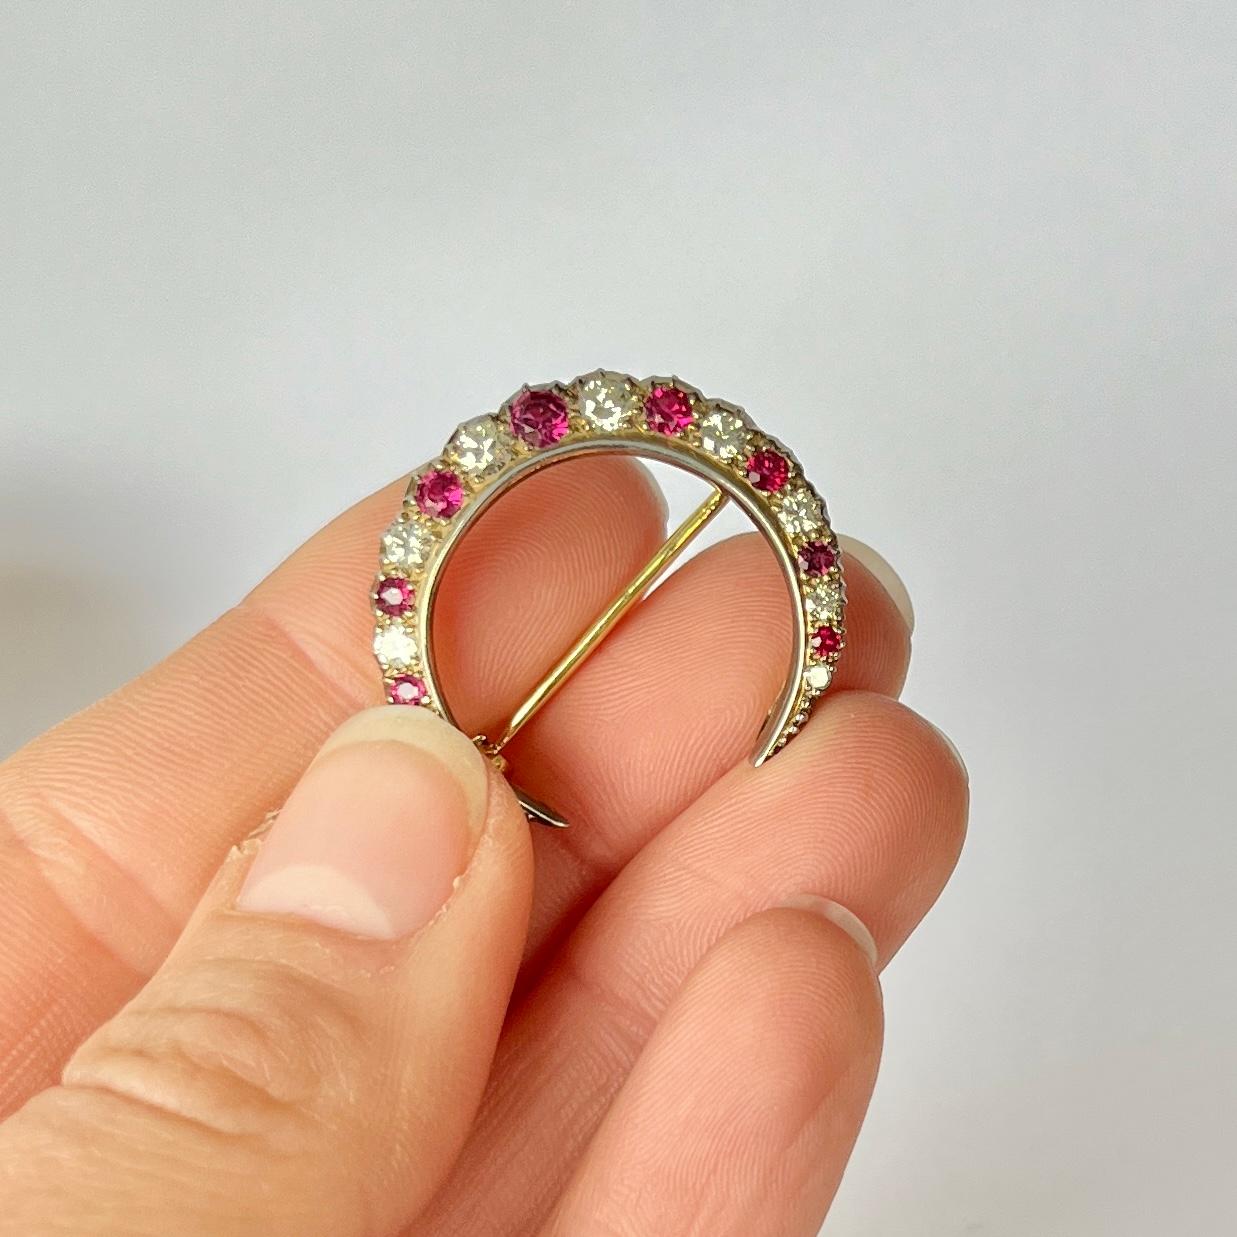 This stylish crescent brooch holds a total of 9 rubies and 10 diamonds. The rubies total approximately 65pts and the diamonds total aproximately 80pts. The brooch is modelled out of 18carat gold.

Brooch Dimensions: 26x25mm

Weight: 4.3g